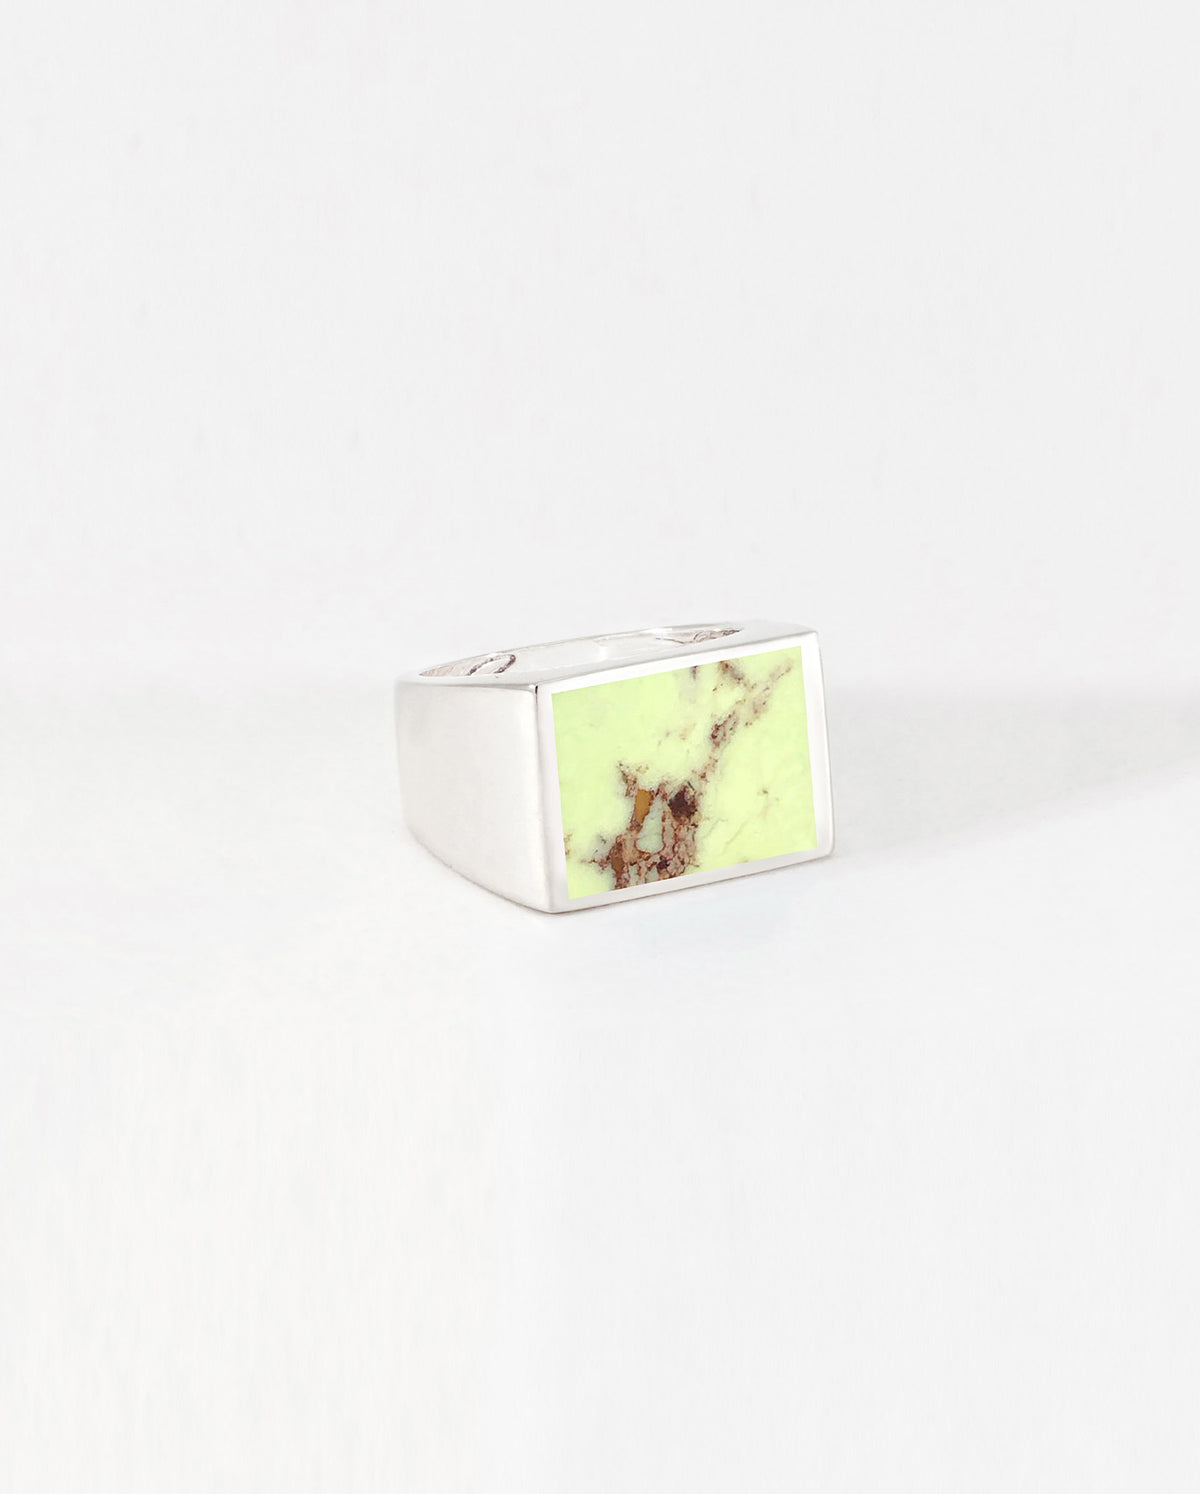 Signet Ring Silver With Palomino Stone Inlay